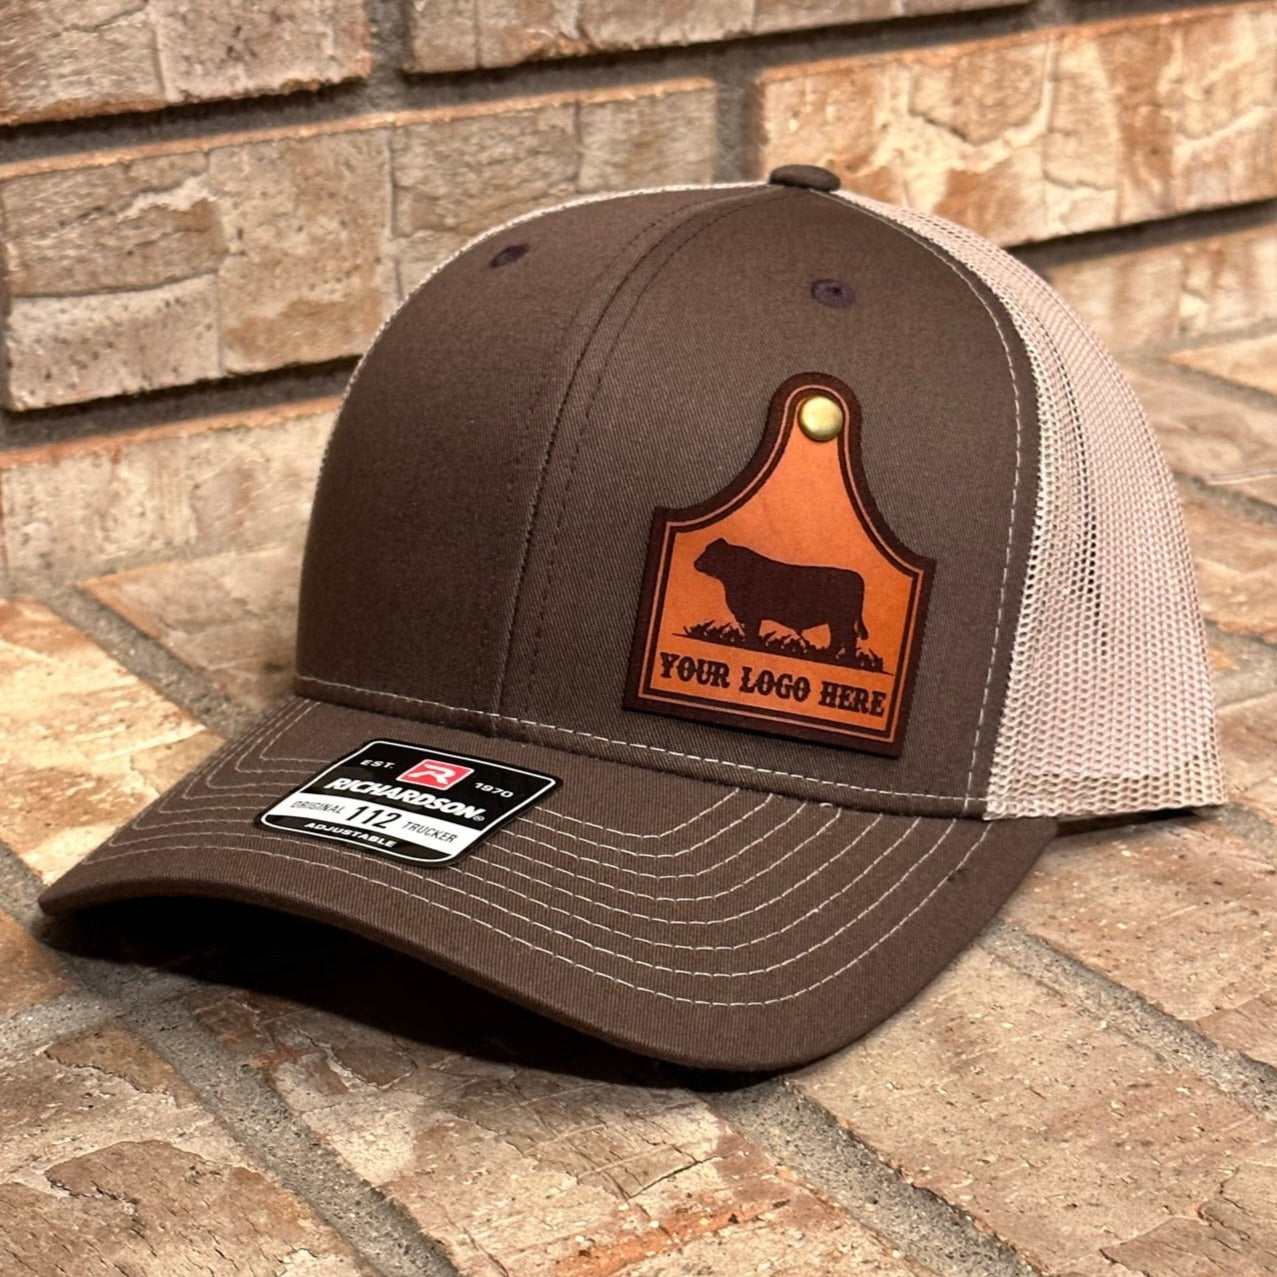 This Is My Cowboy Hat Leather Patch Hat Heather Gray/Black